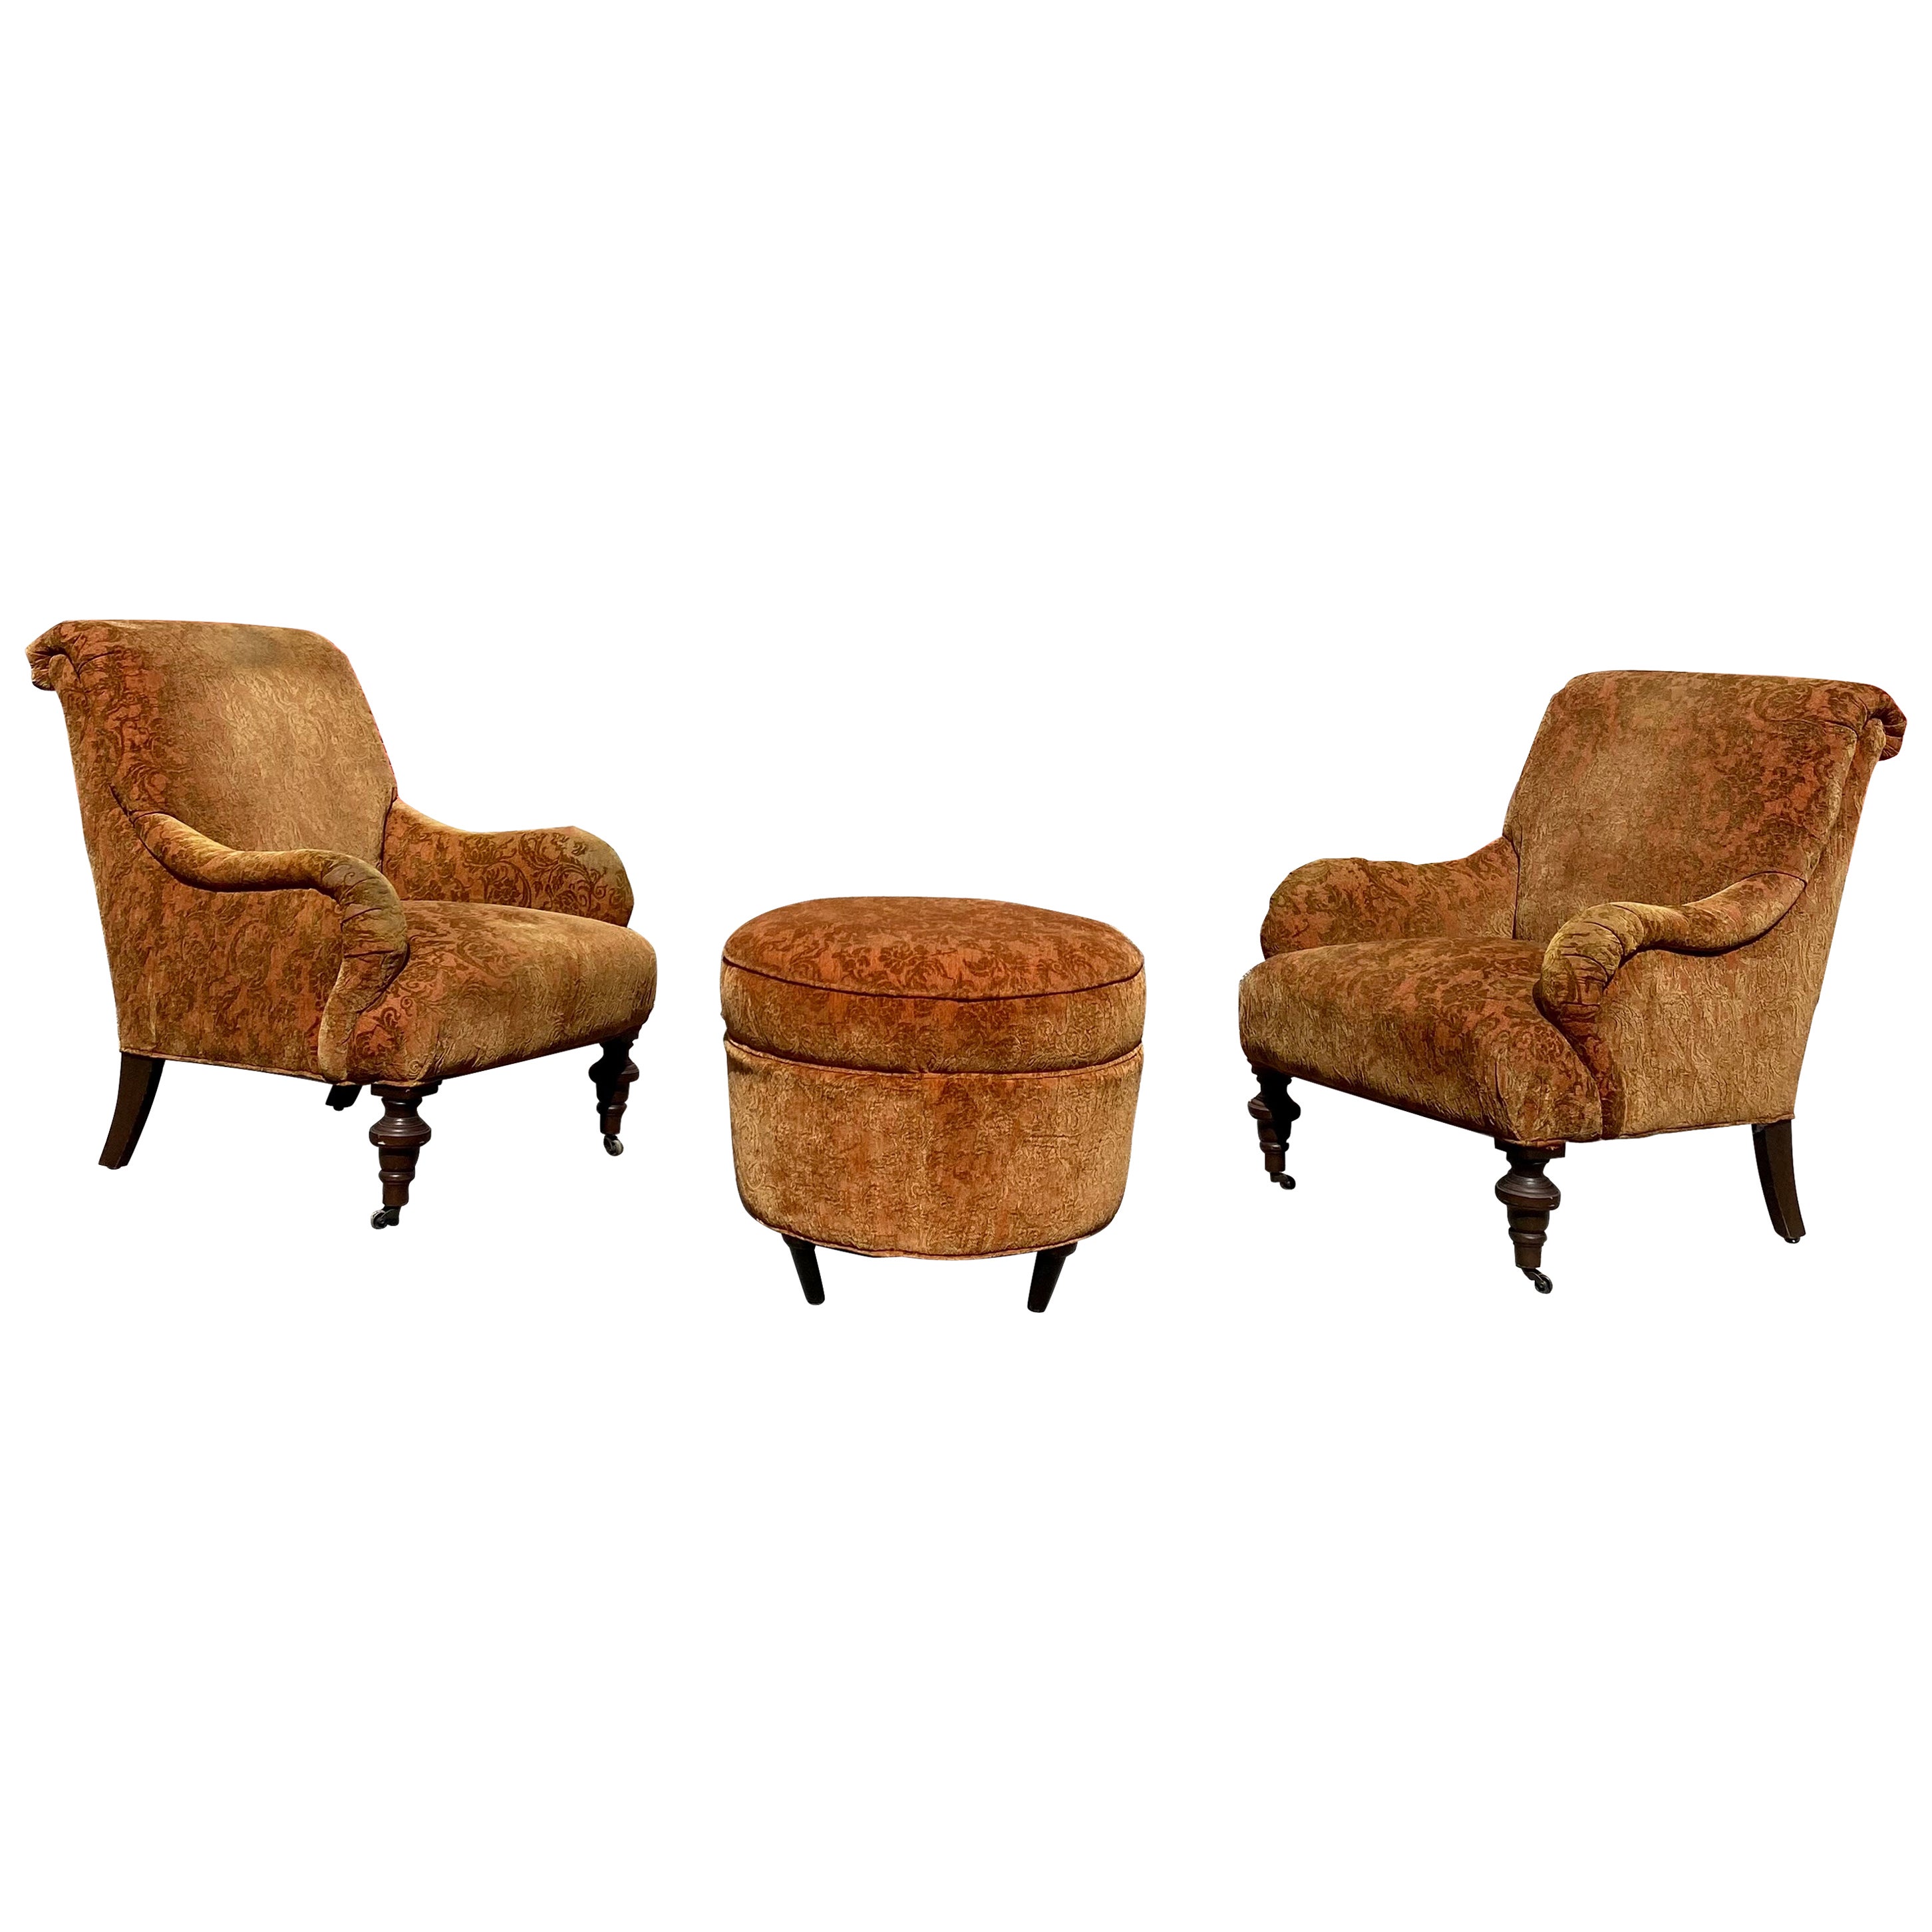 Attributed to George Smith Damask Velvet Castors Armchairs & Ottoman, Set of 2 For Sale